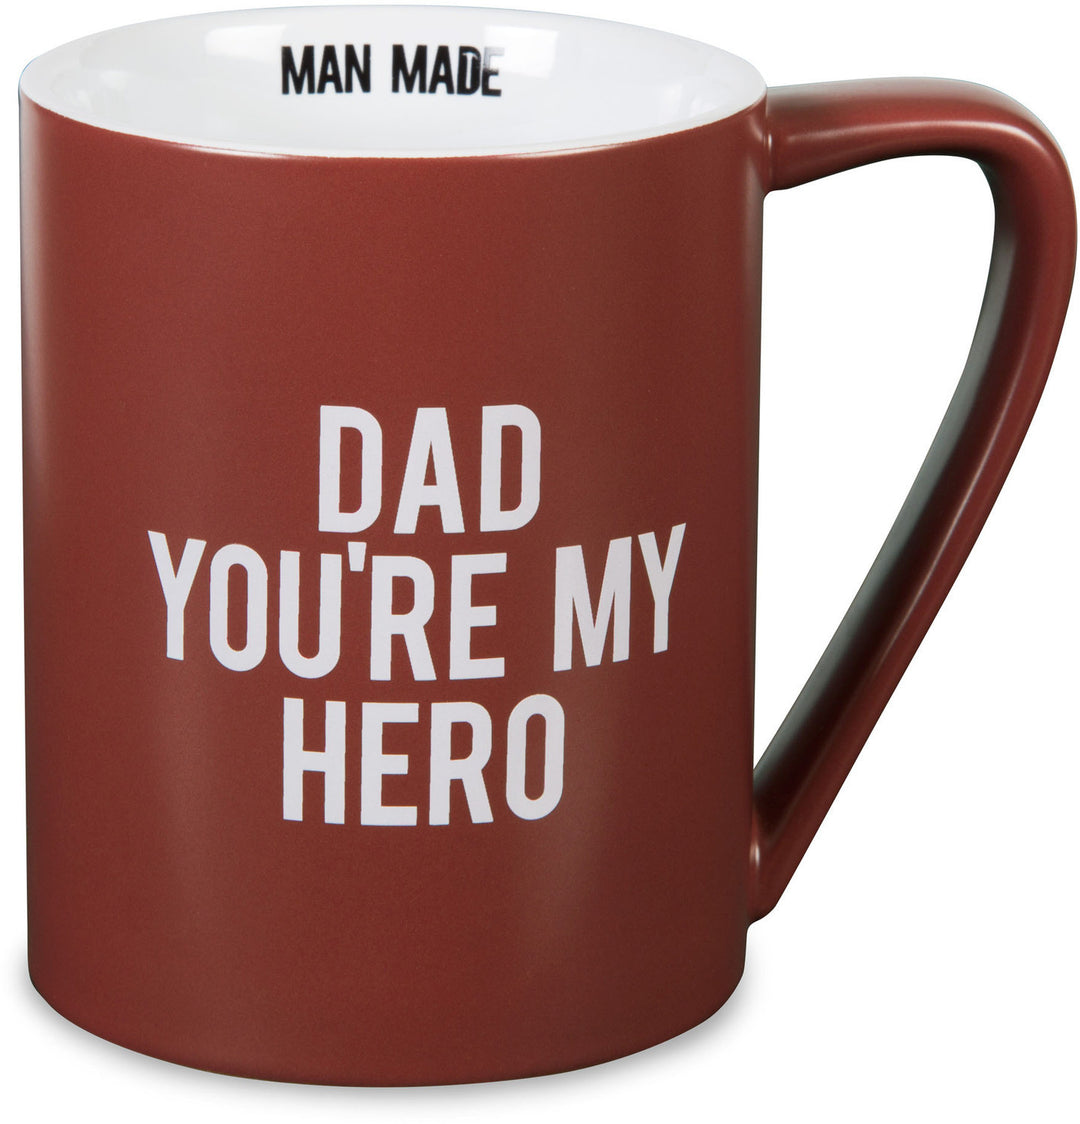 Dad You're My Hero (Man Made Collection) by Pavilion Gifts